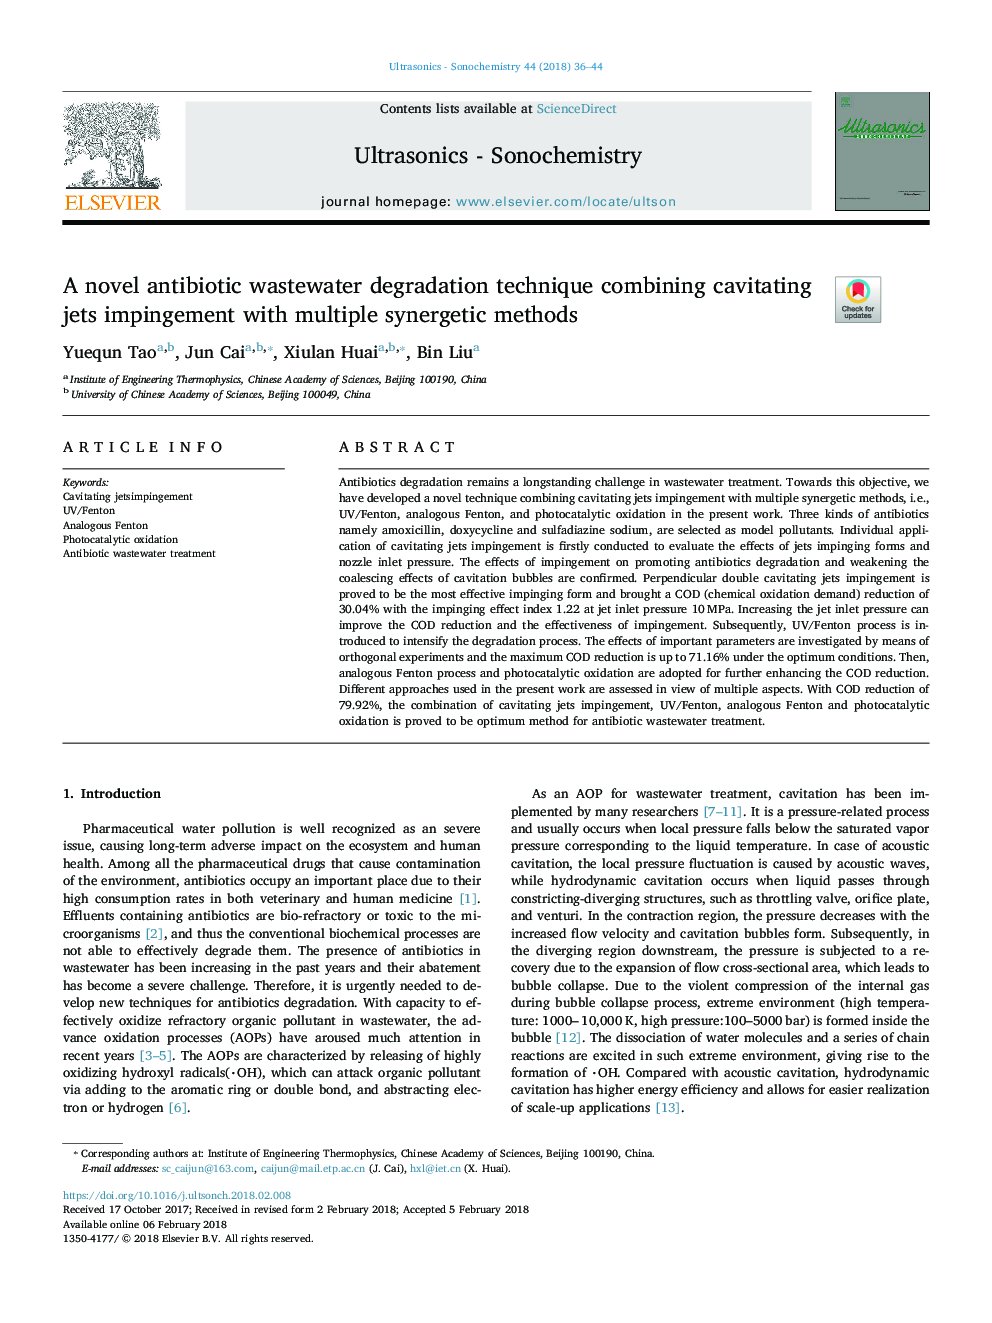 A novel antibiotic wastewater degradation technique combining cavitating jets impingement with multiple synergetic methods